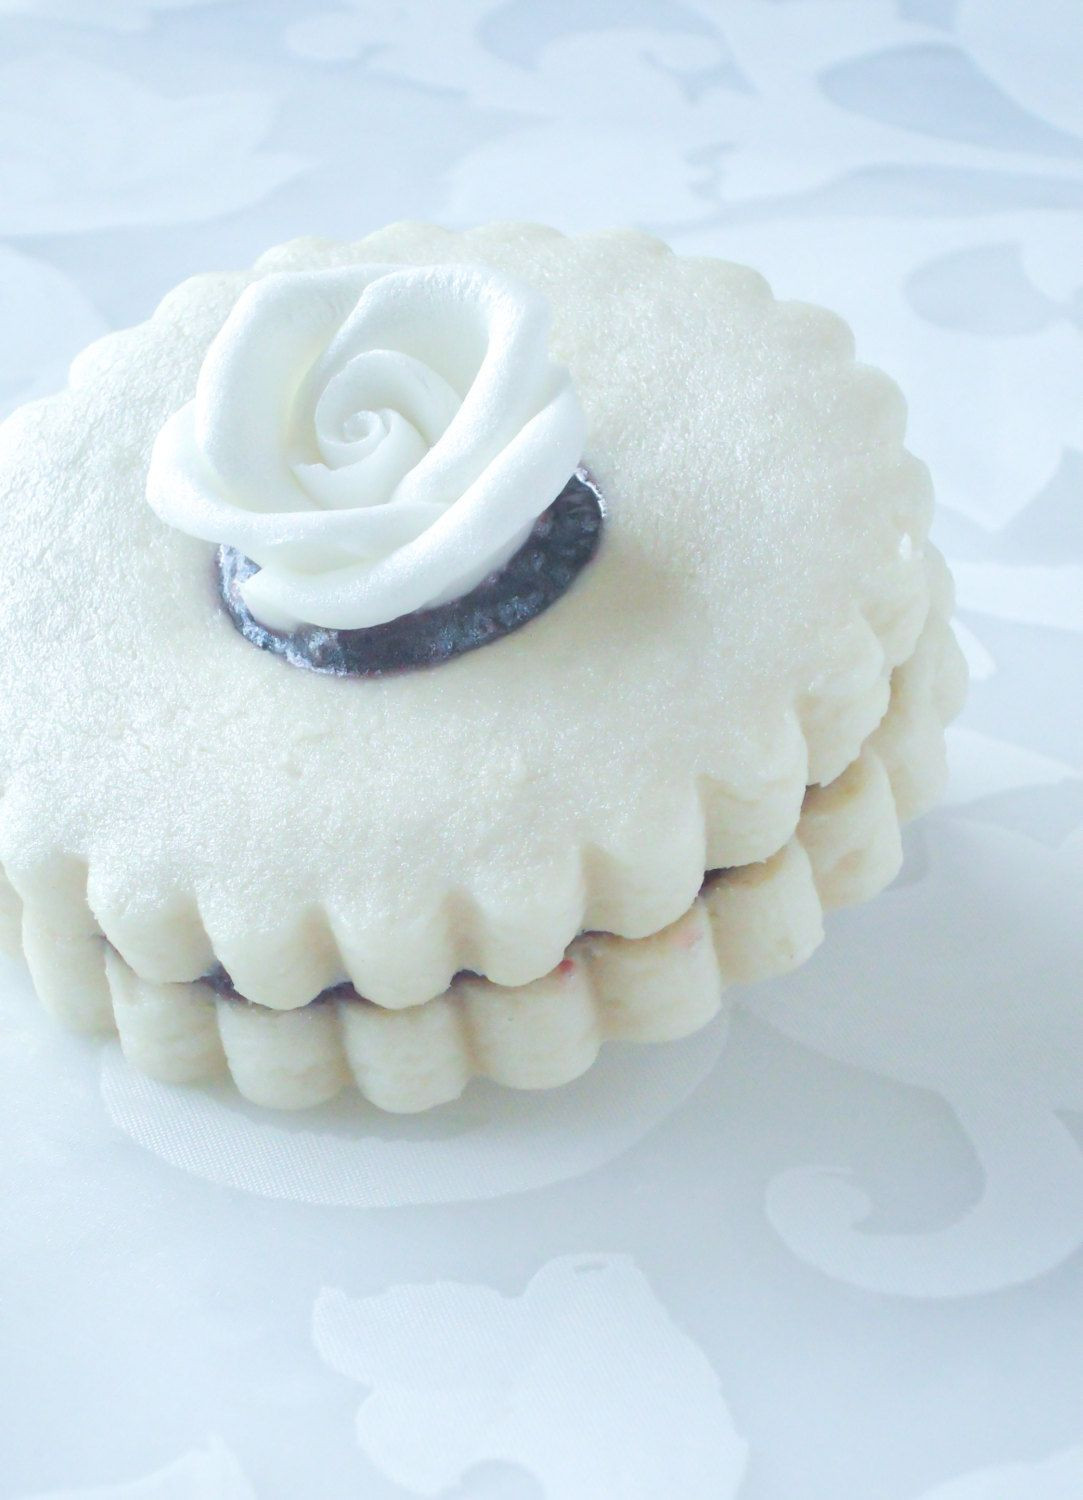 Gourmet Decorated Shortbread Cookies
 Cookie Wedding Favors Gourmet Decorated by